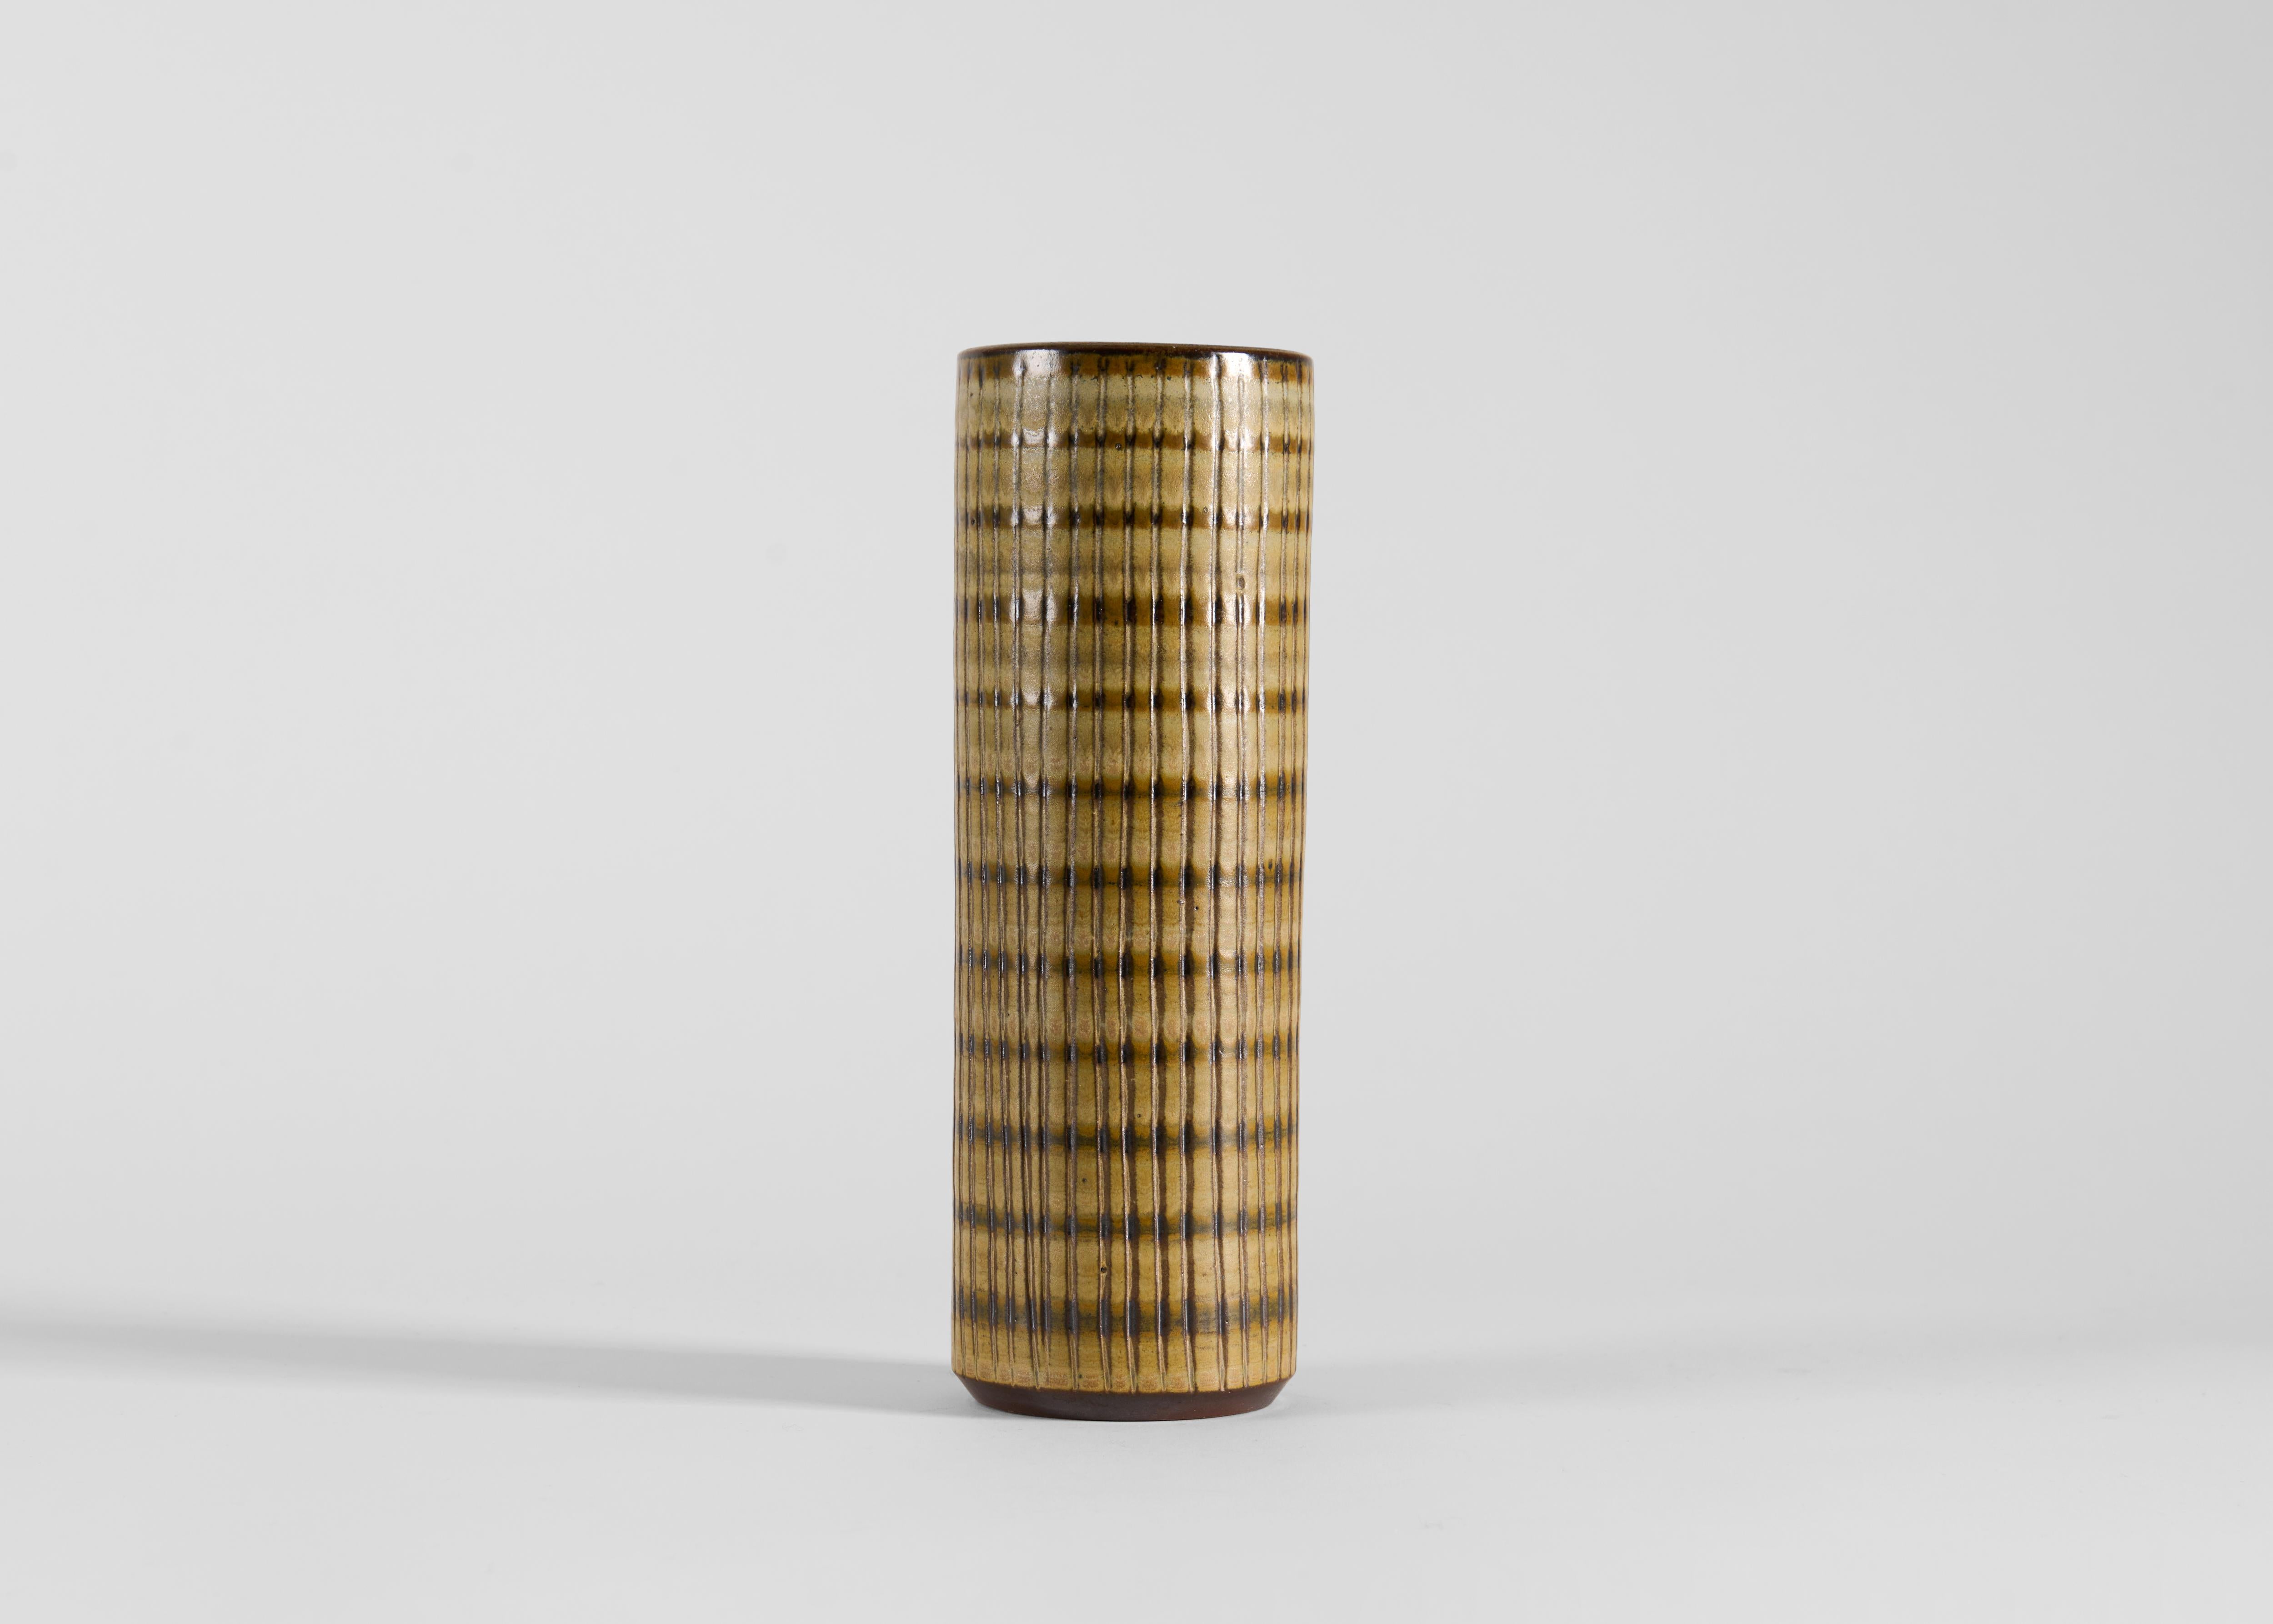 Mid-Century Modern Cylindrical Ceramic Vase with Earth-Toned Glaze, Wallåkra, Sweden, 1960s For Sale